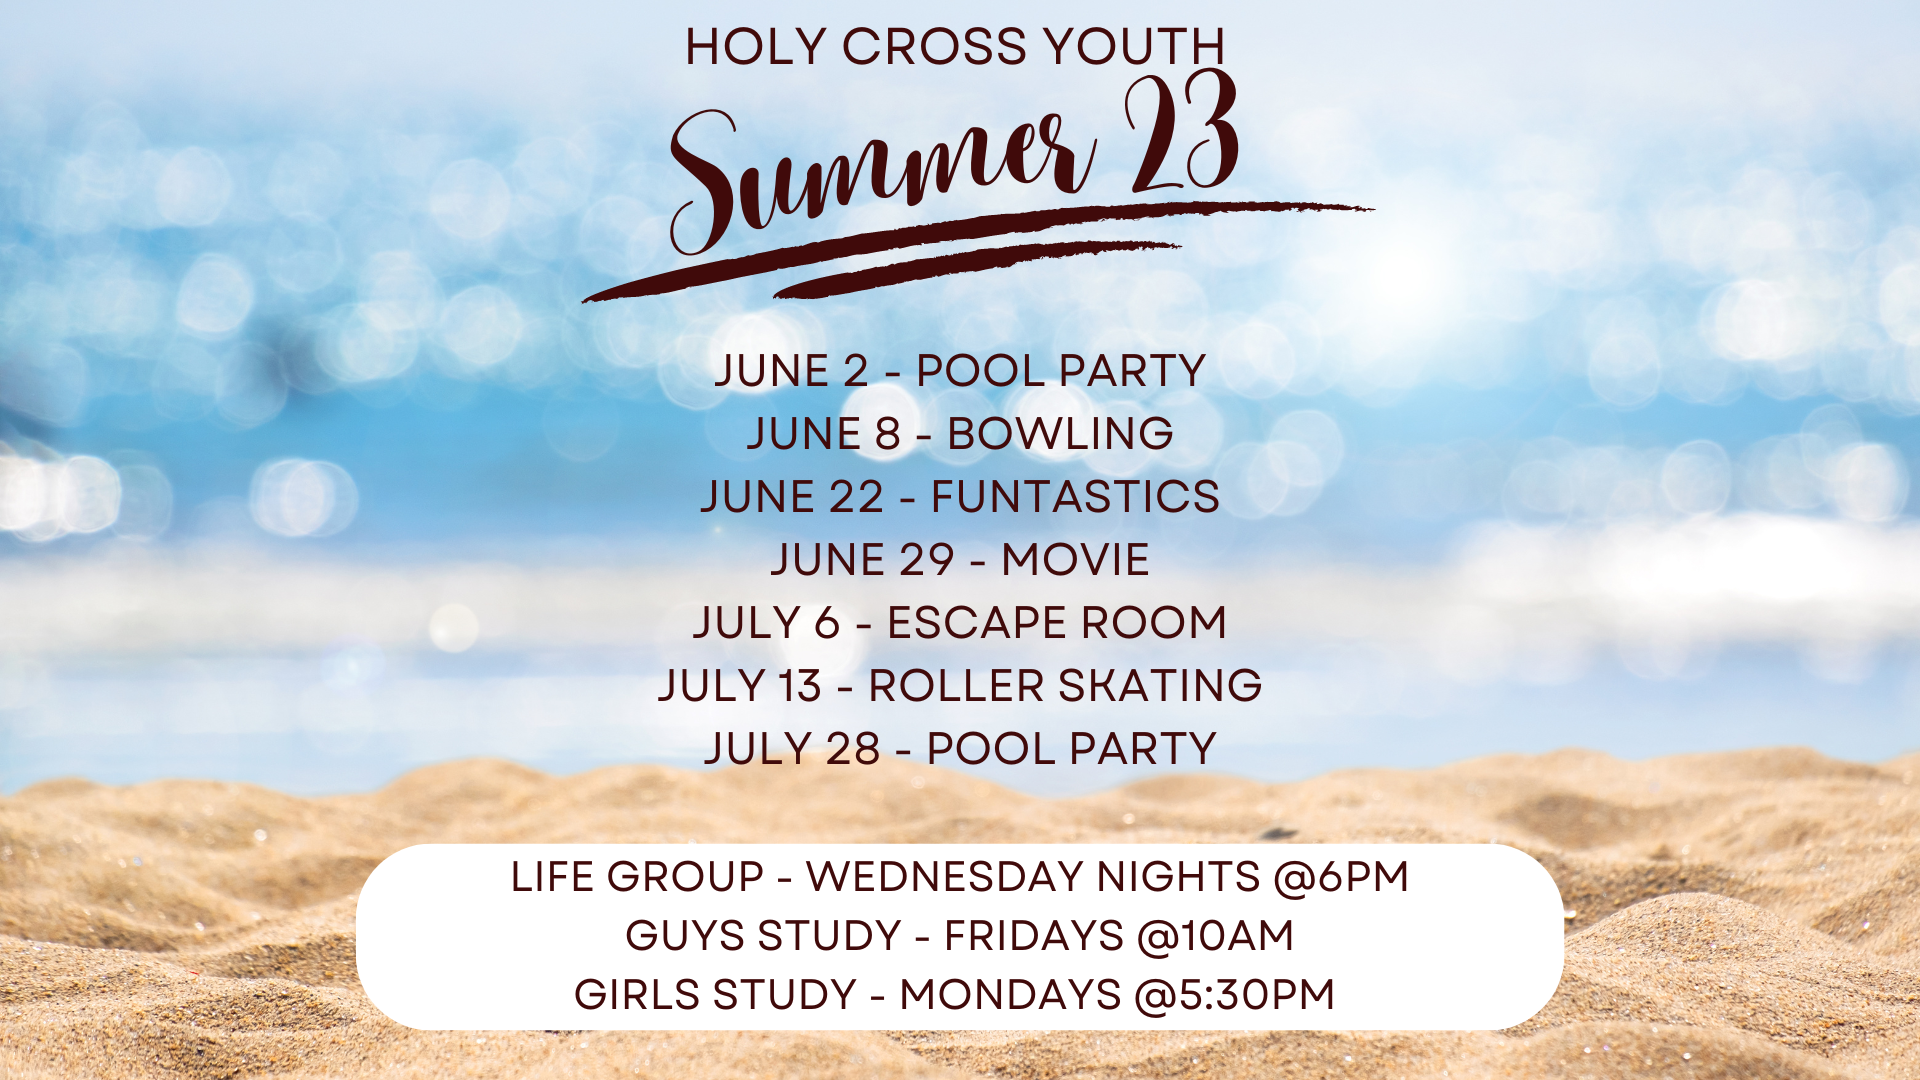 Youth Summer 23